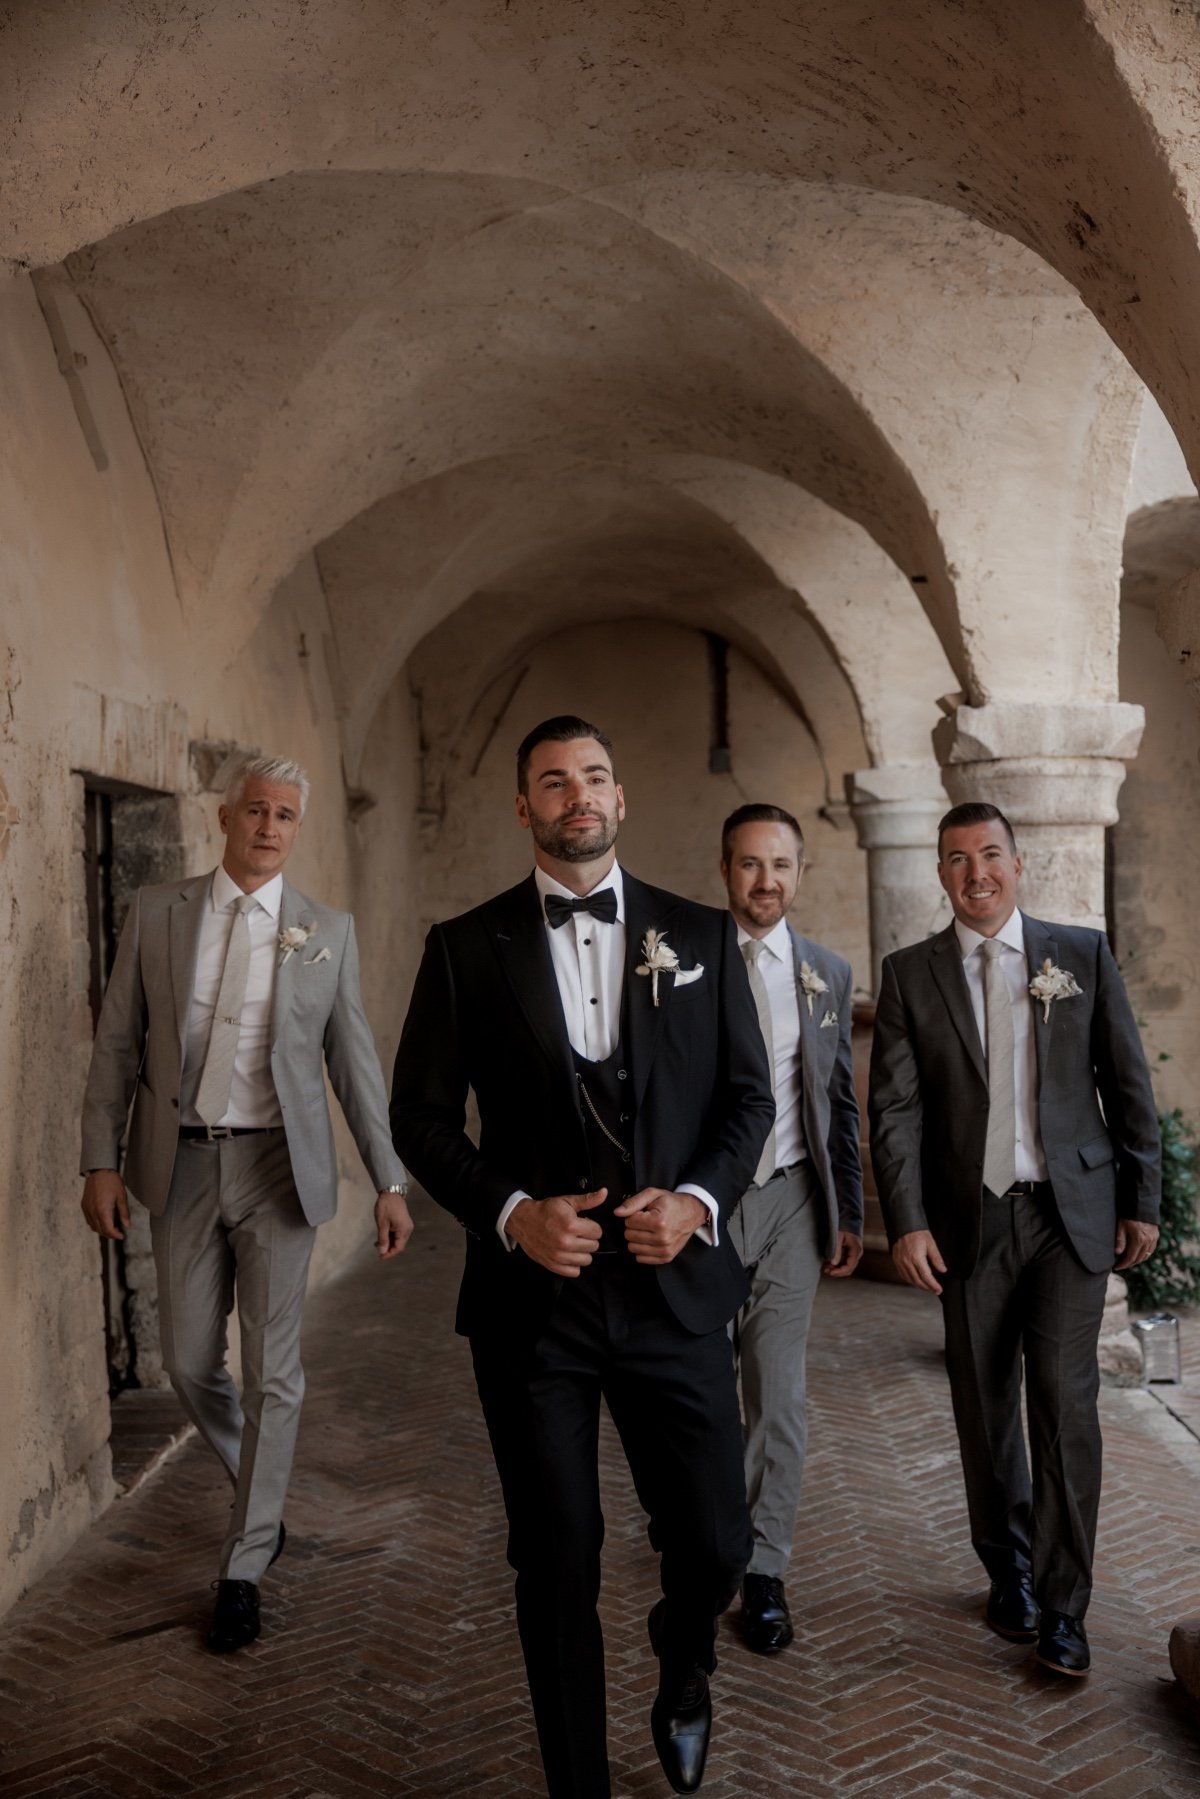 wedding suits in shades of gray